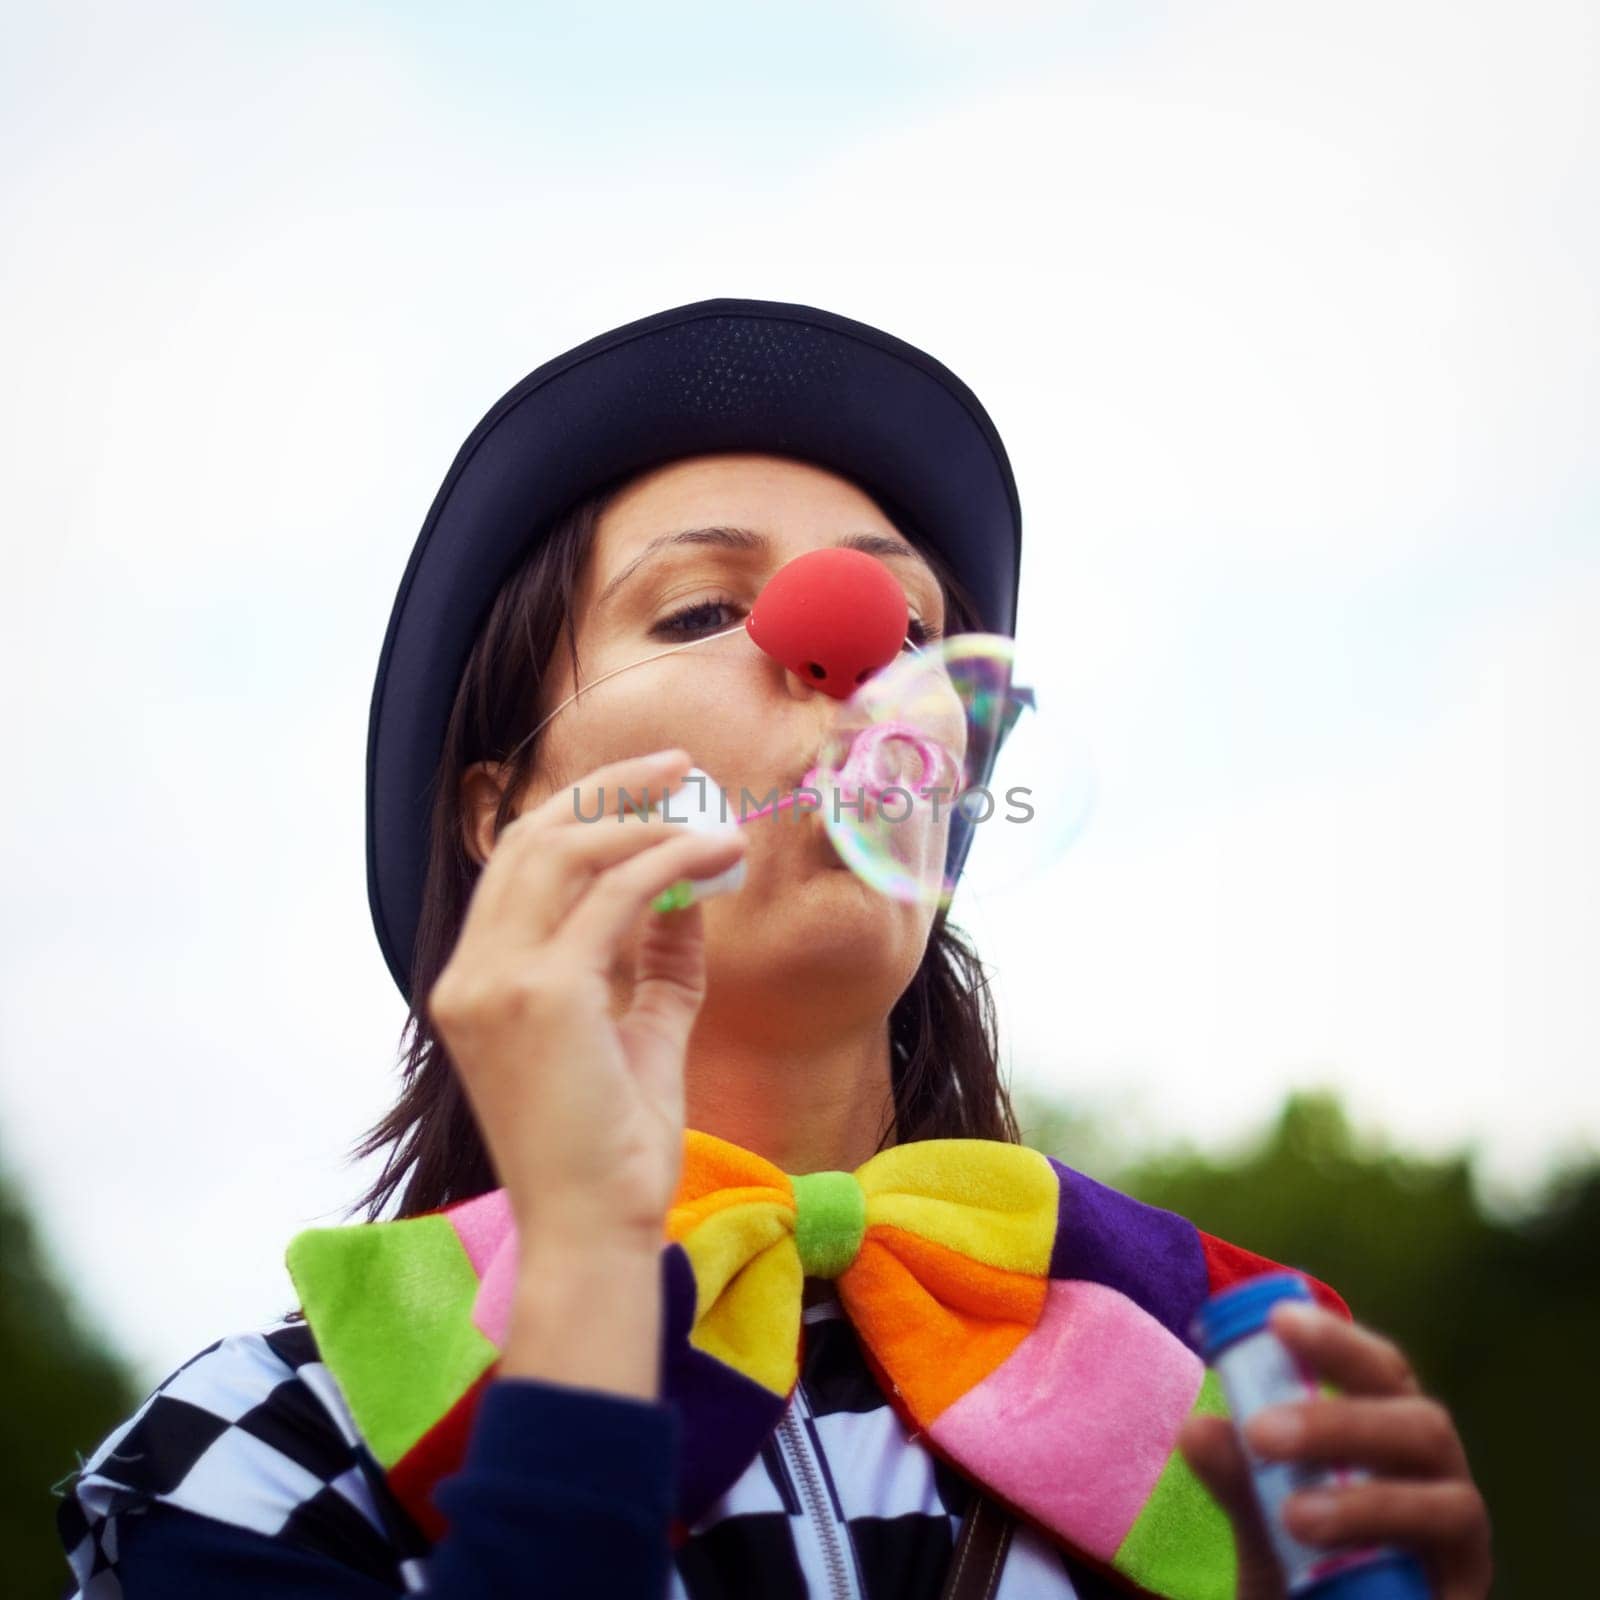 Clown blowing bubbles at outdoor festival for fun, fantasy and summer adventure in nature. Face of person, street performer or circus character in park with creative color at happy carnival event